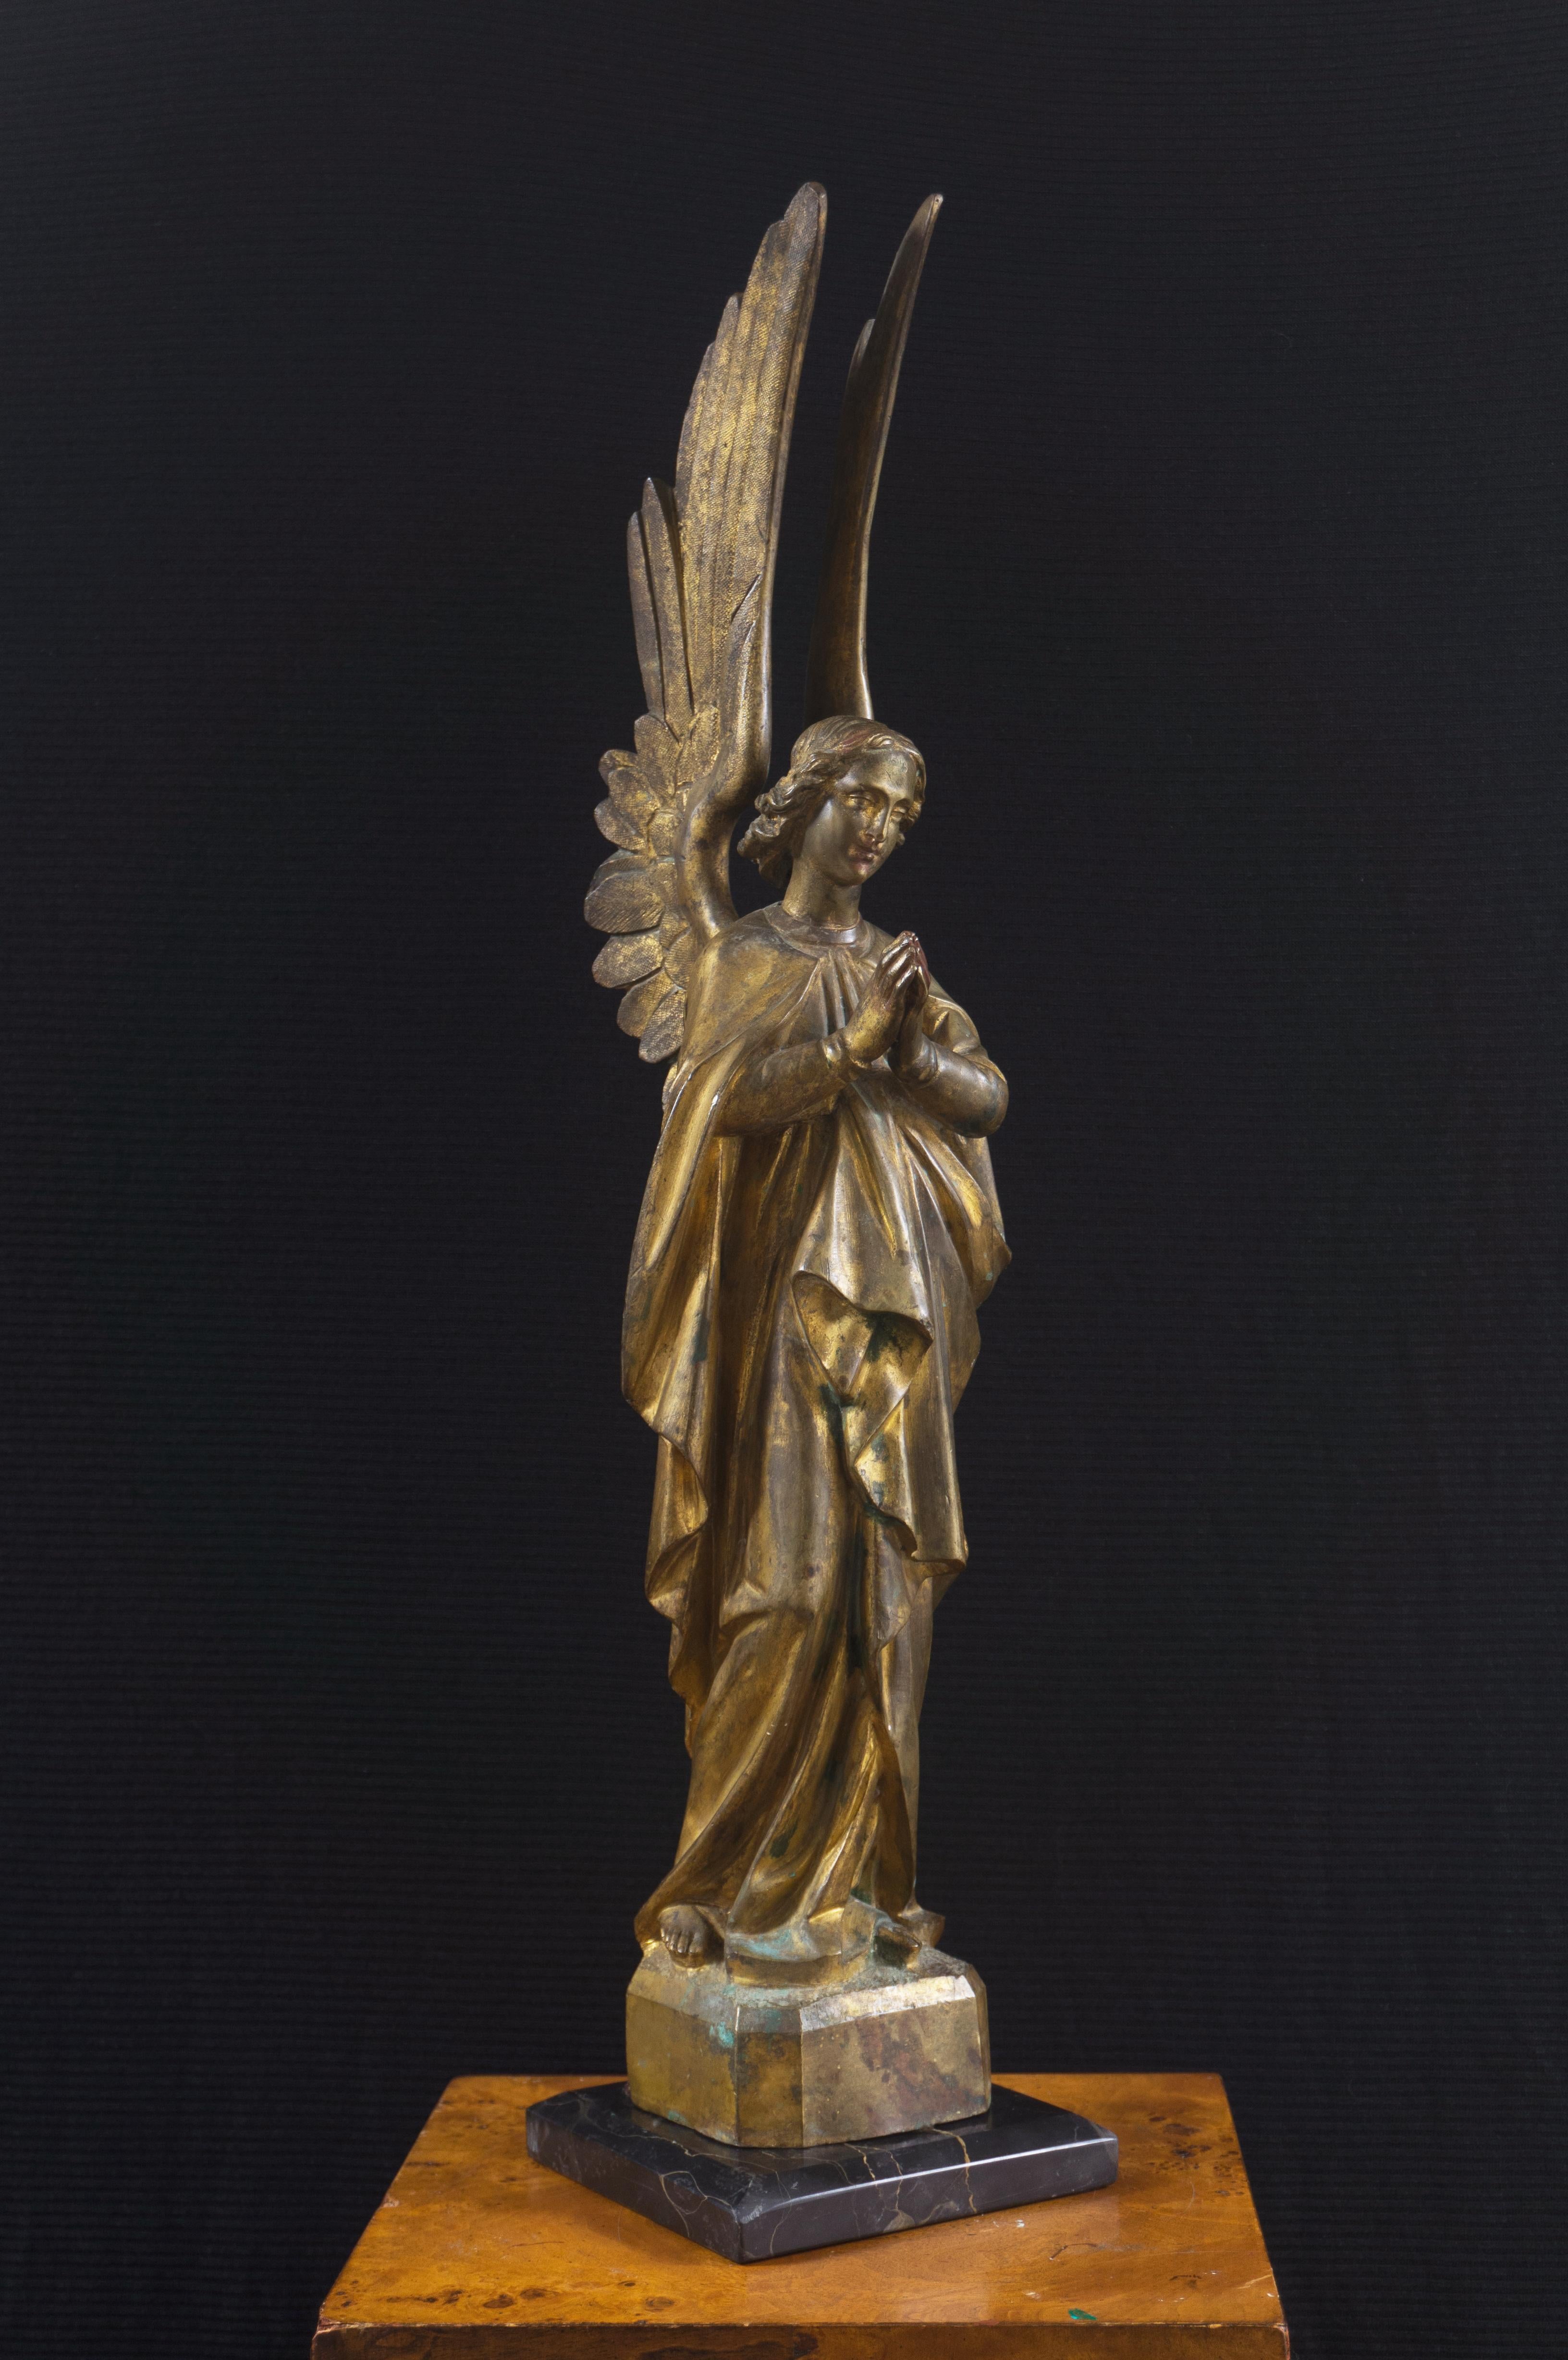 A substantial and finely cast, late 19th-century French School, figural bronze of a winged and robed Archangel, the spiritual being shown standing with hands gently pressed together and wearing an expression of ineffable sweetness. This large and